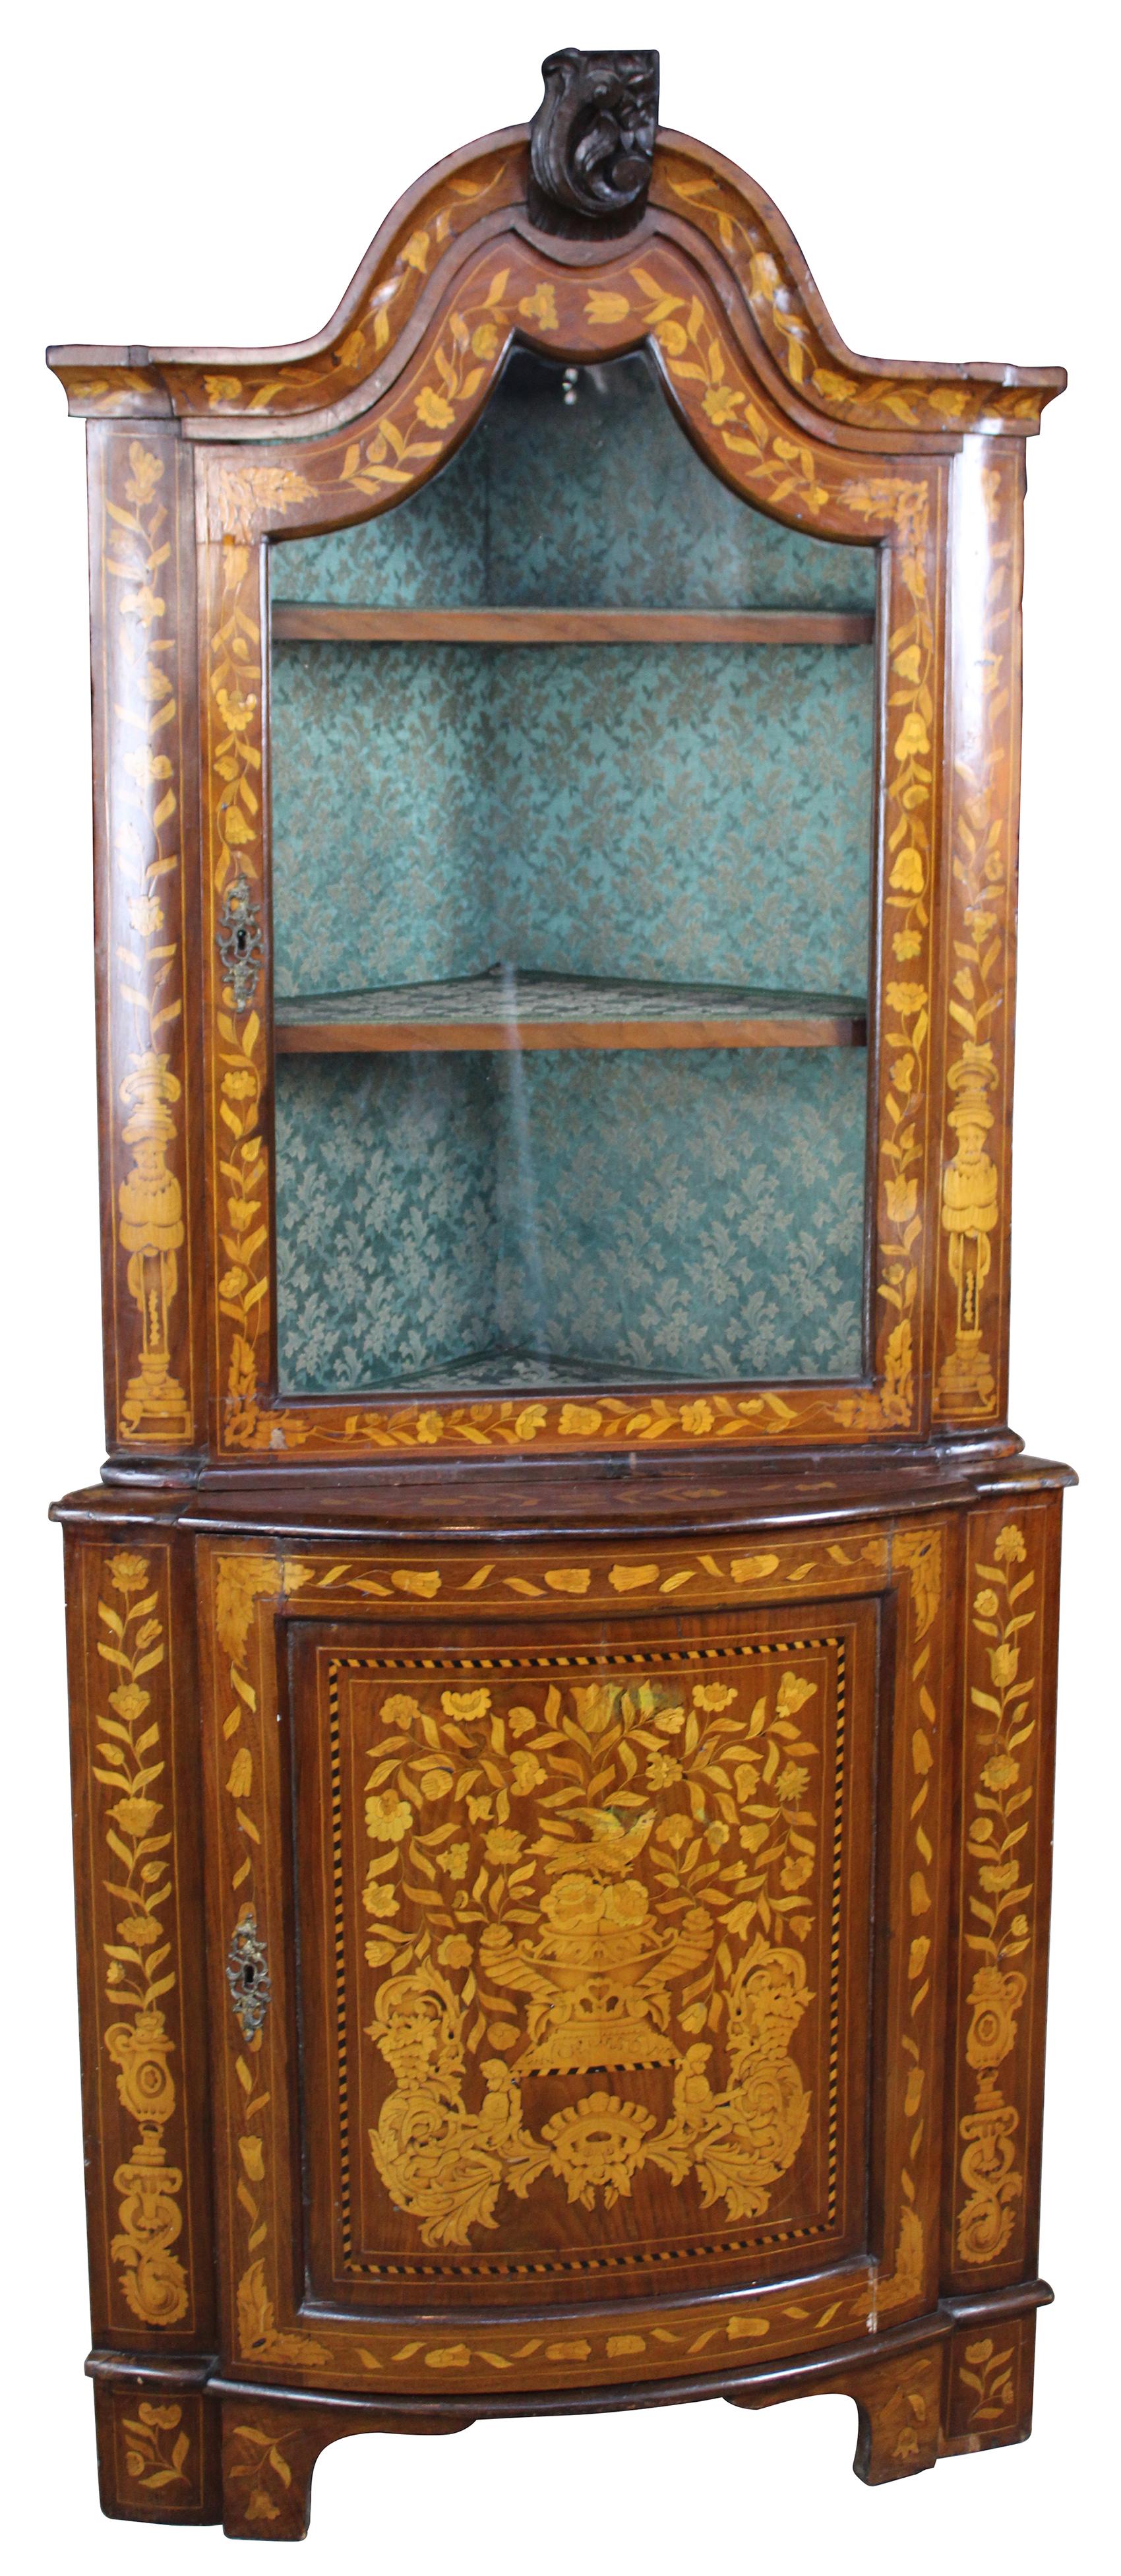 Antique mid-19th century Dutch Marquetry corner cabinet or cupboard. Made of walnut with intricately detailed fruitwood inlay showing flowers, vases, figures and other ornamental detail. Features three interior shelves for display lined with green